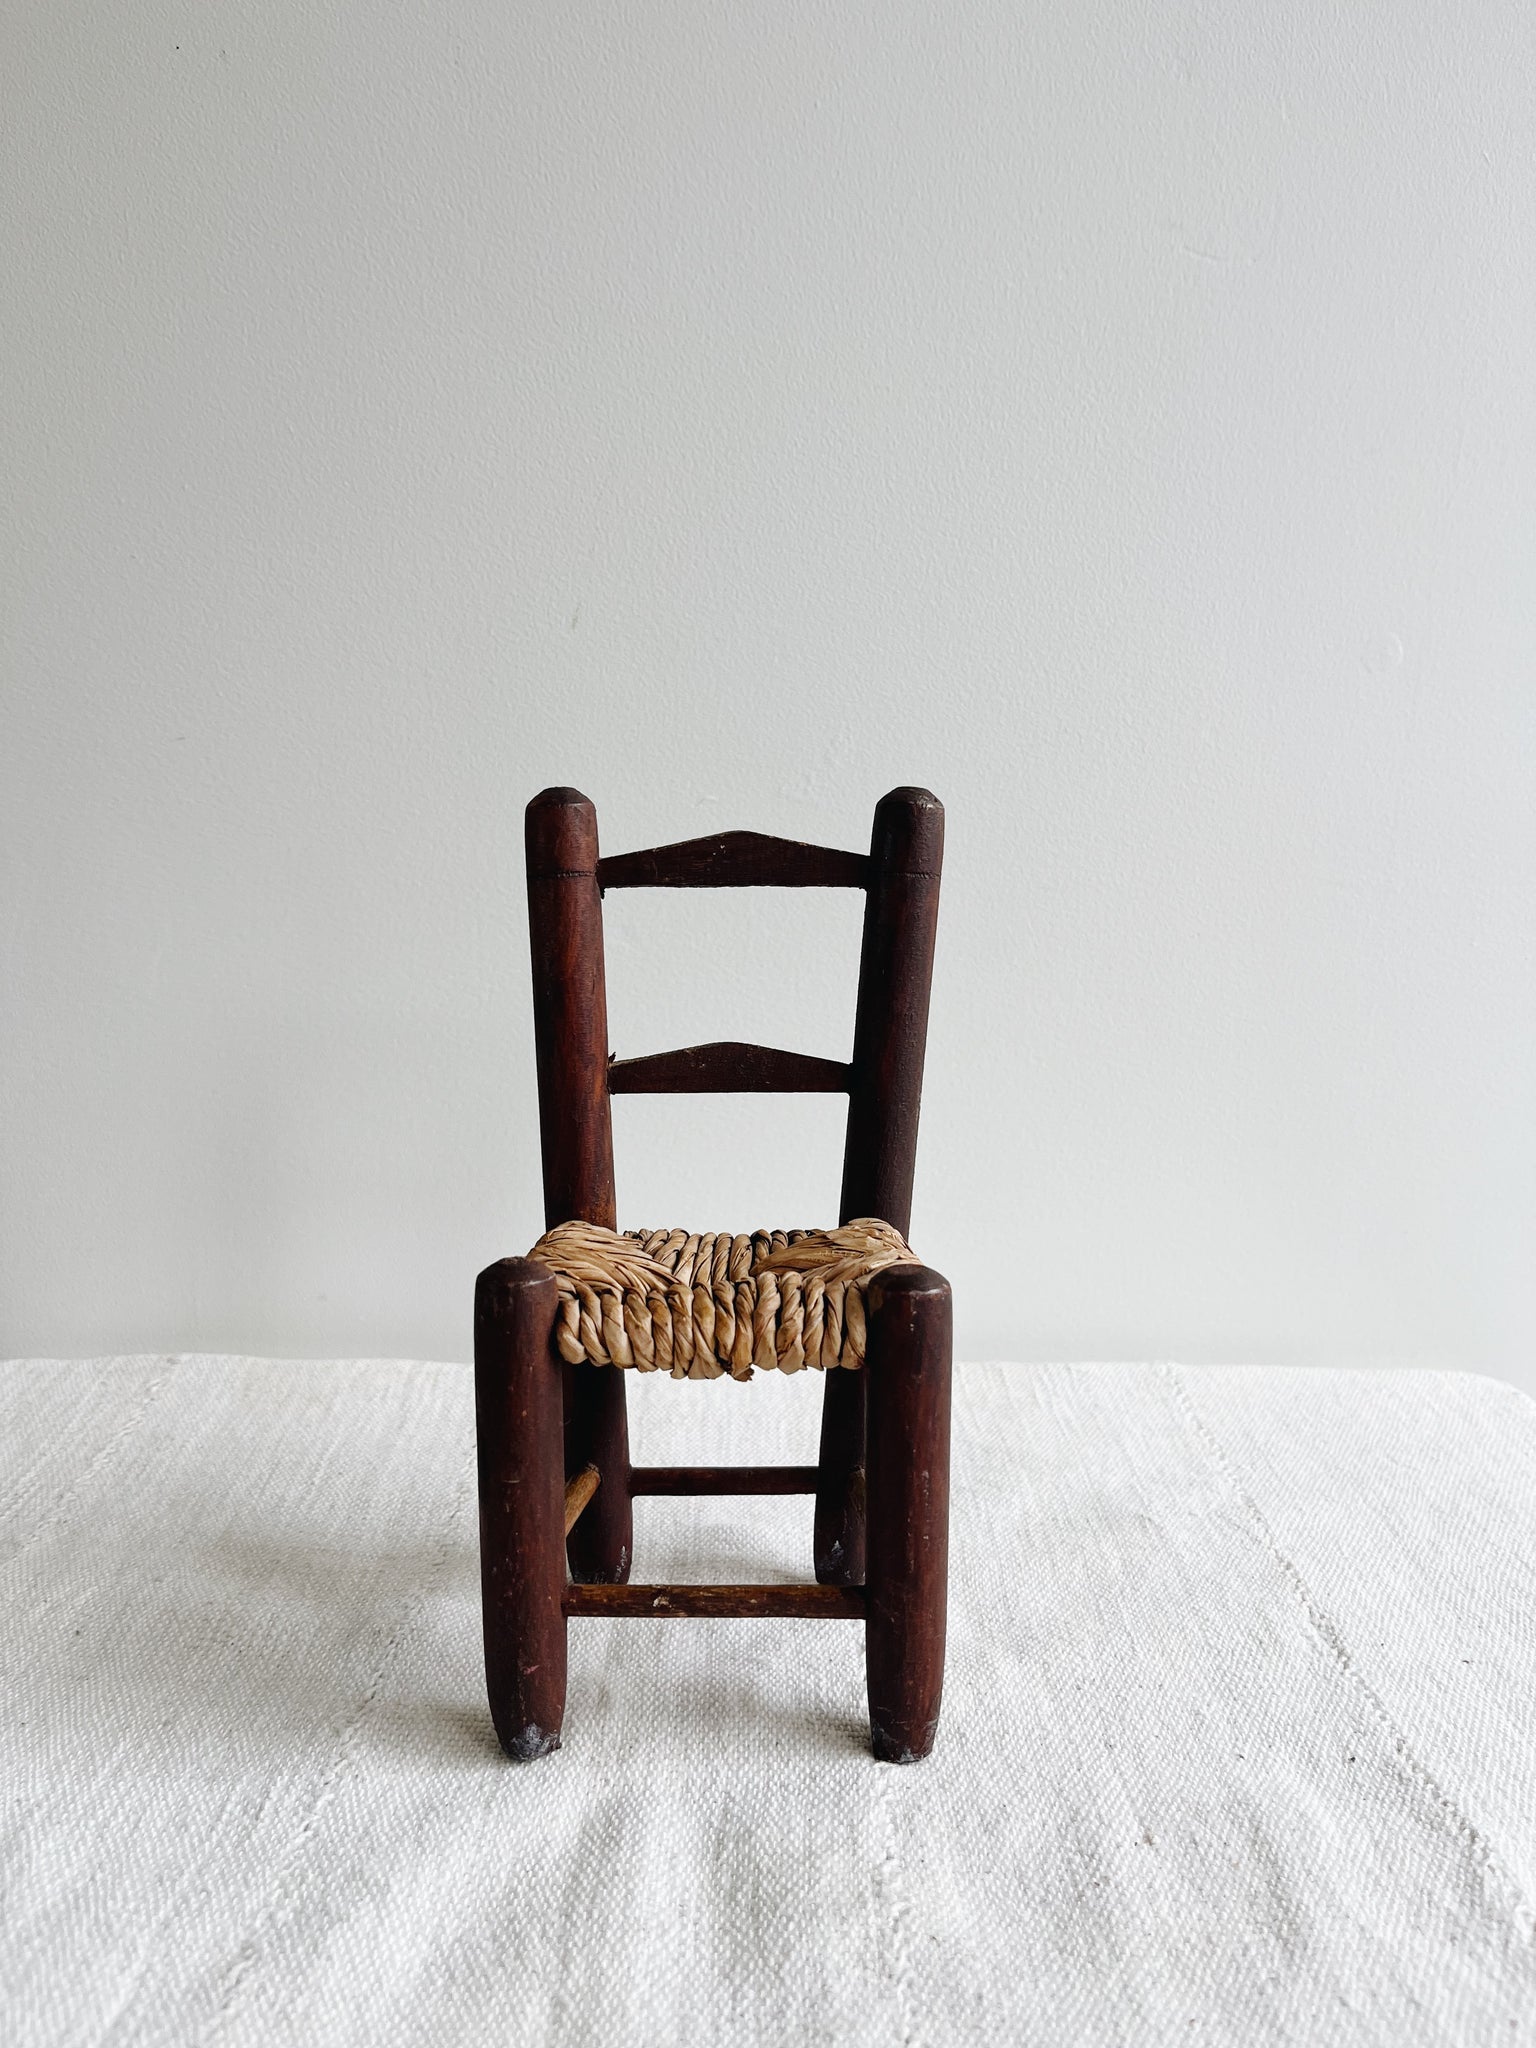 Small Shaker chair